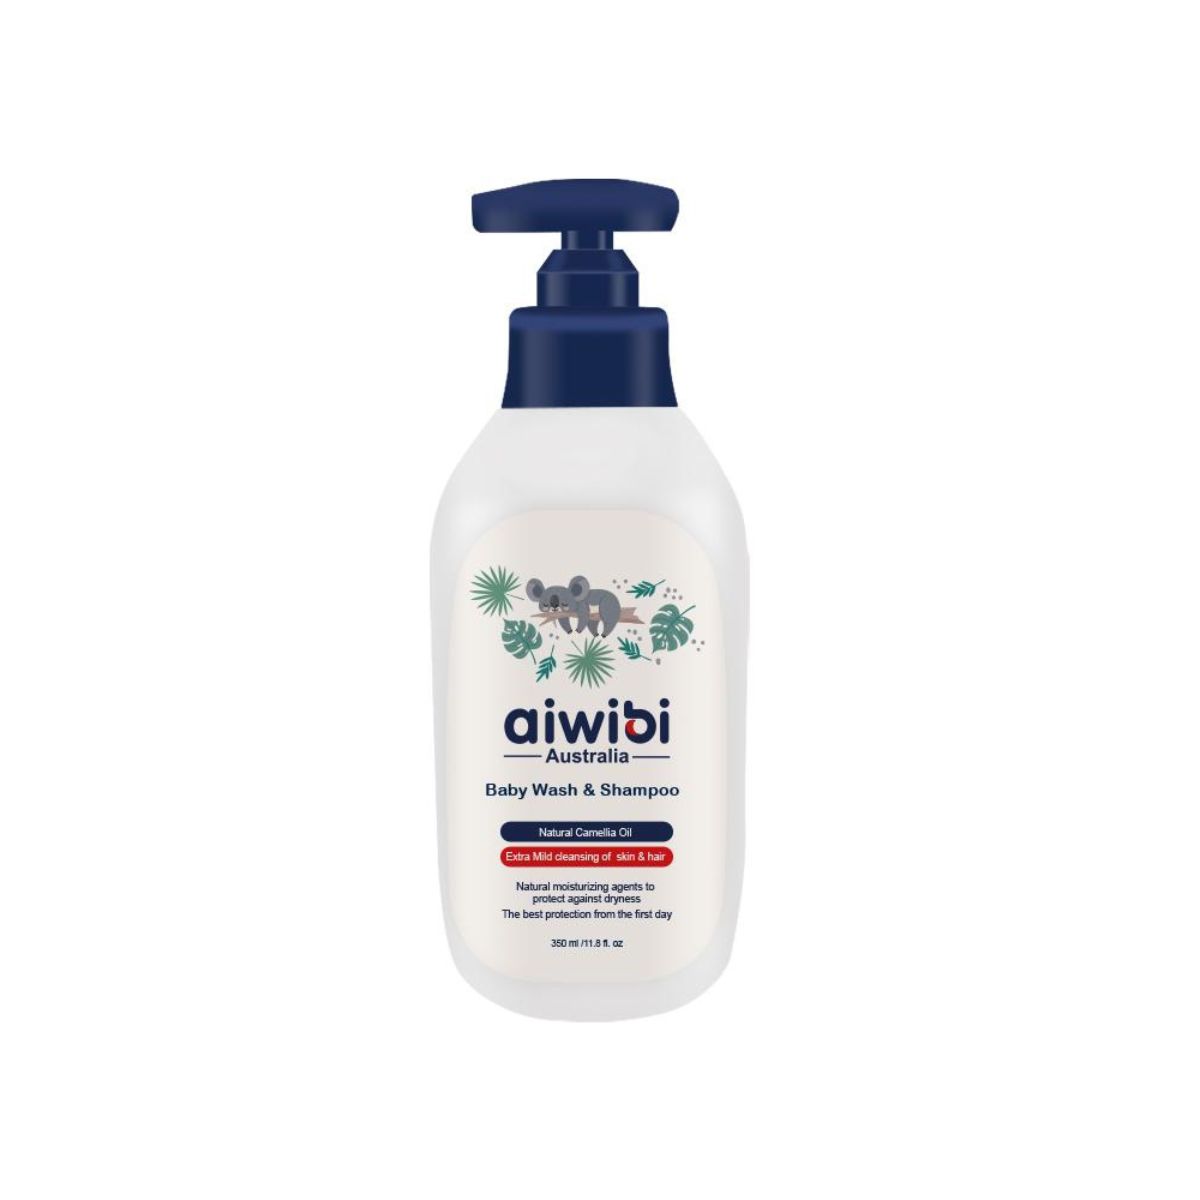 Aiwibi Baby Wash & Shampoo - Natural Camellia Oil - Extra Mild Cleansing Of Skin And Hair - 350ml